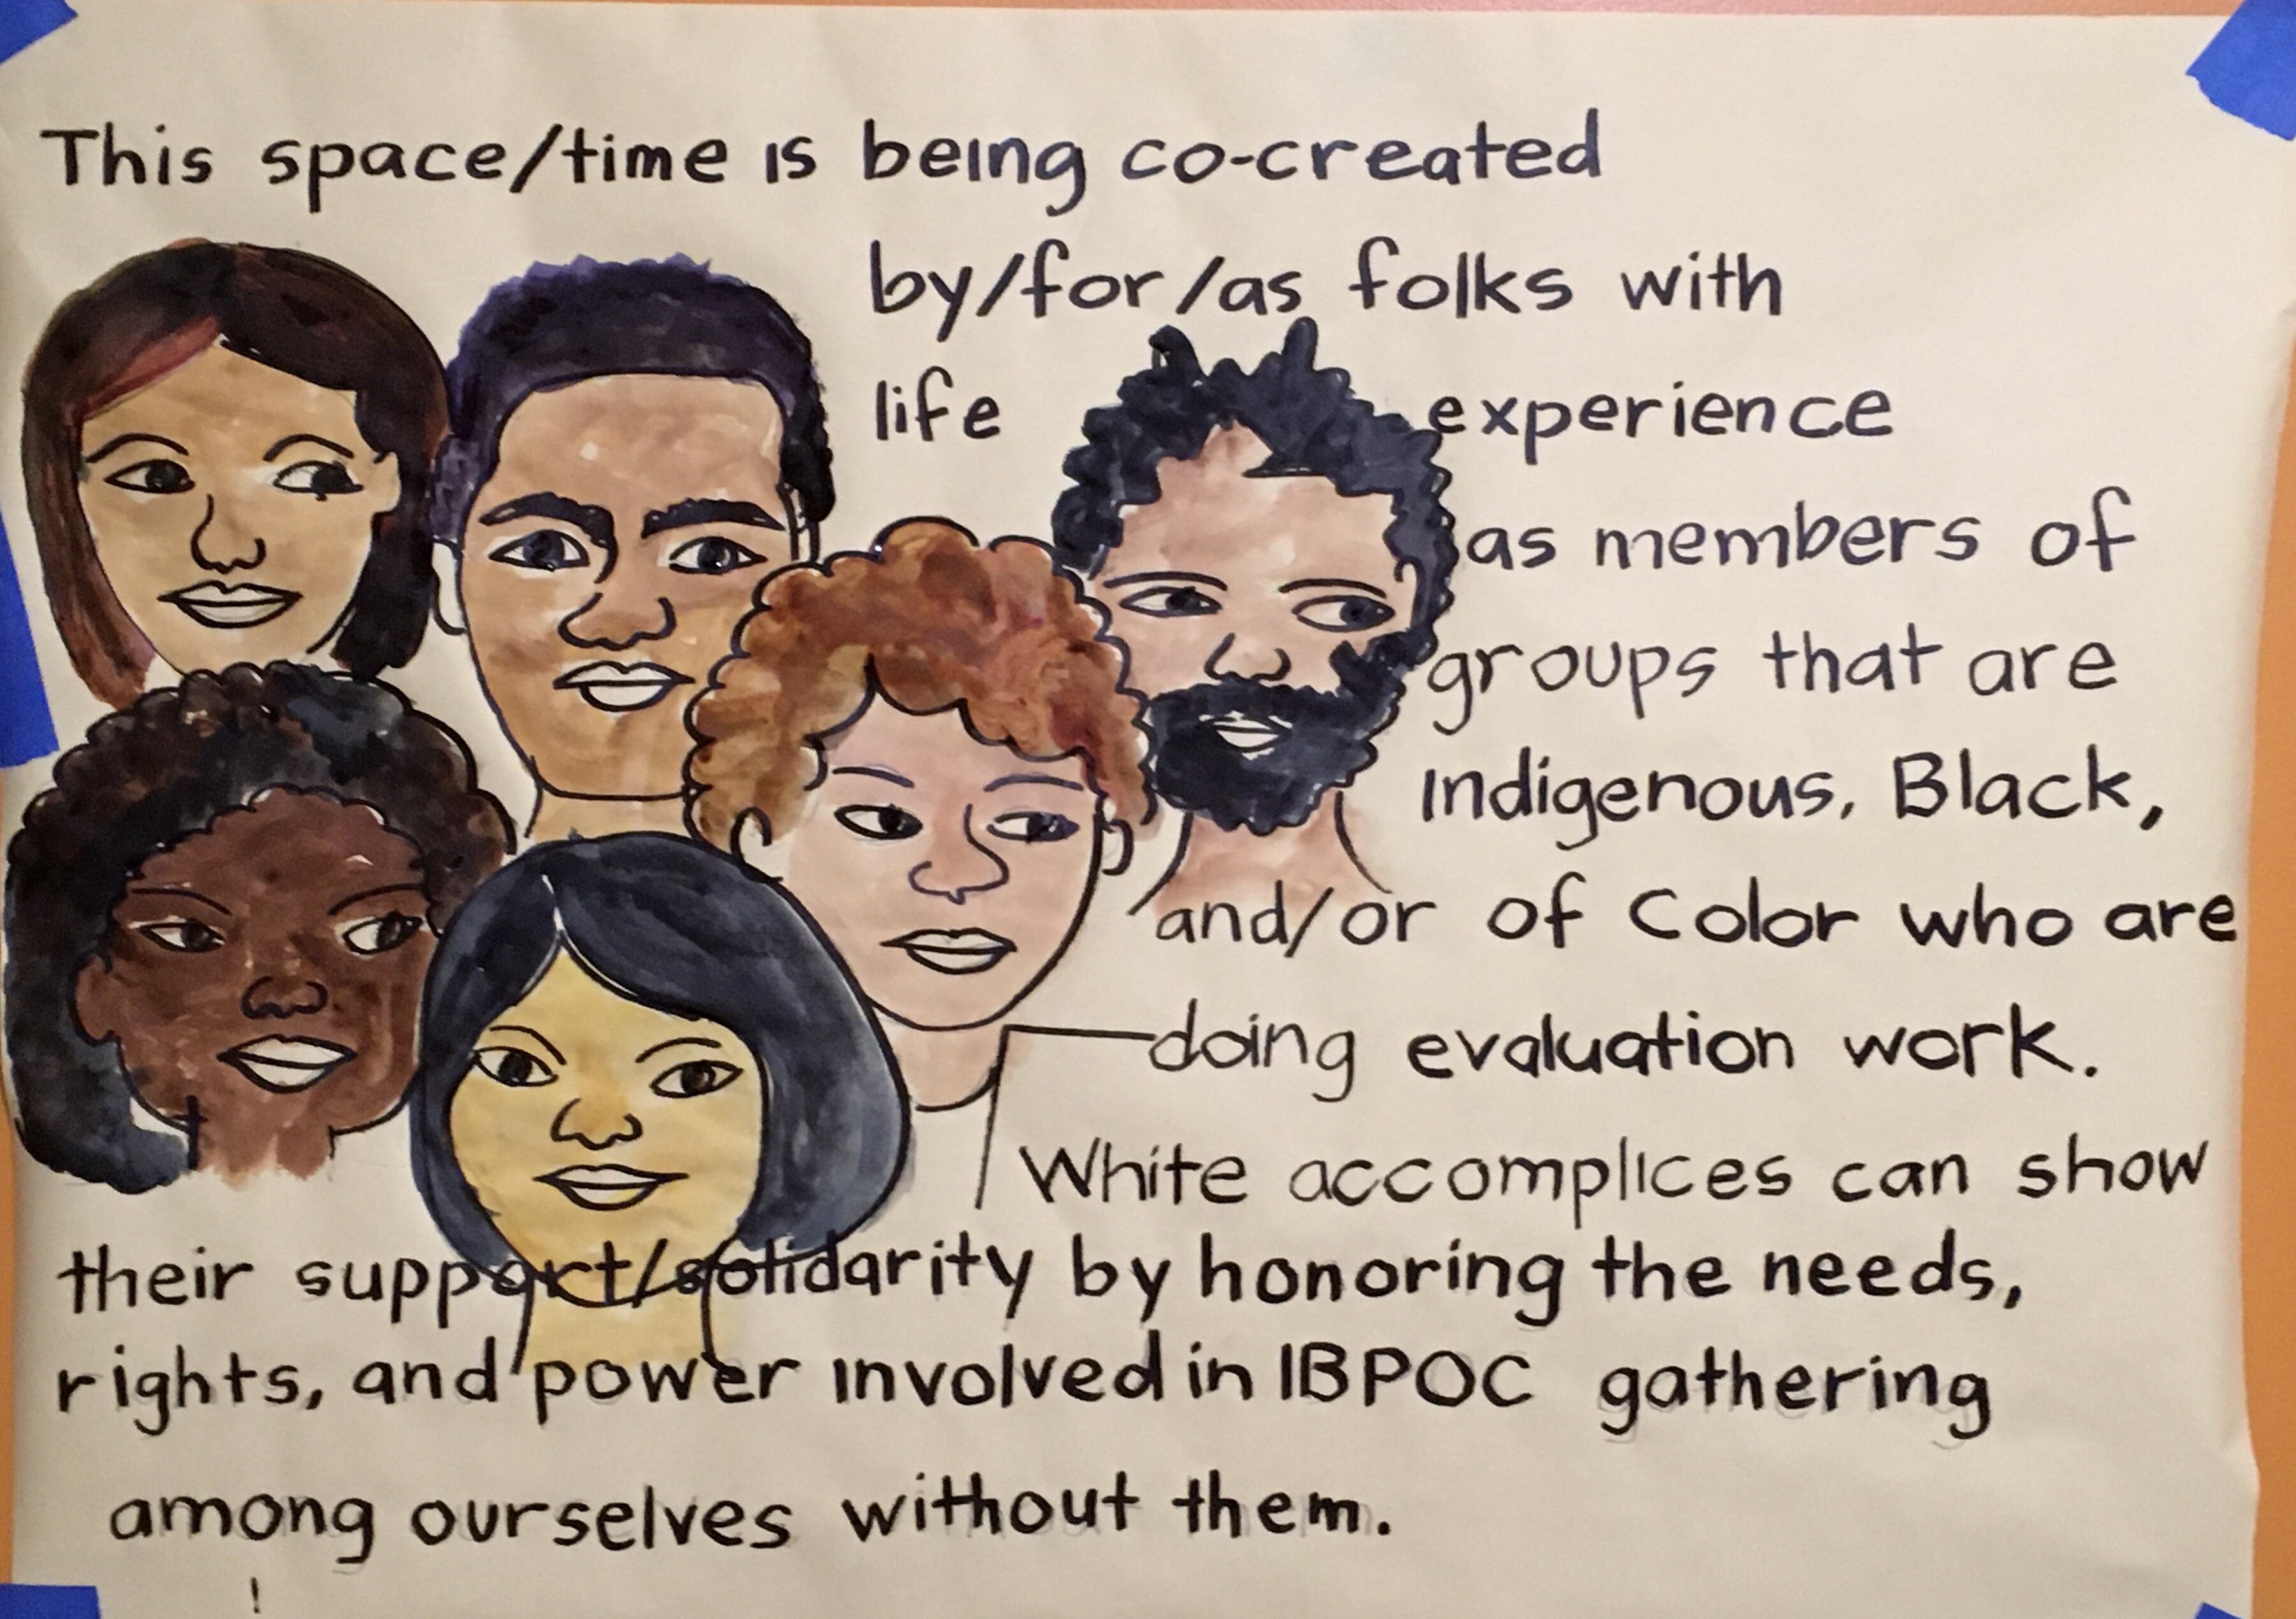 Description of image: The faces of 6 people of varying genders and hair colors and skin colors, with the words, “This space/time is being co-created by/for/as folks with life experience as members of groups that are Indigenous, Black, and/or Of Color who are doing evaluation work. White accomplices can show their support/solidarity by honoring the needs, rights, and power involved in IBPOC gathering among ourselves, without them. There may be future opportunities for white accomplices to engage with us in these conversations.” Beautifully rendered by Anne Gomez of Picture This Graphic Recording & Facilitation.